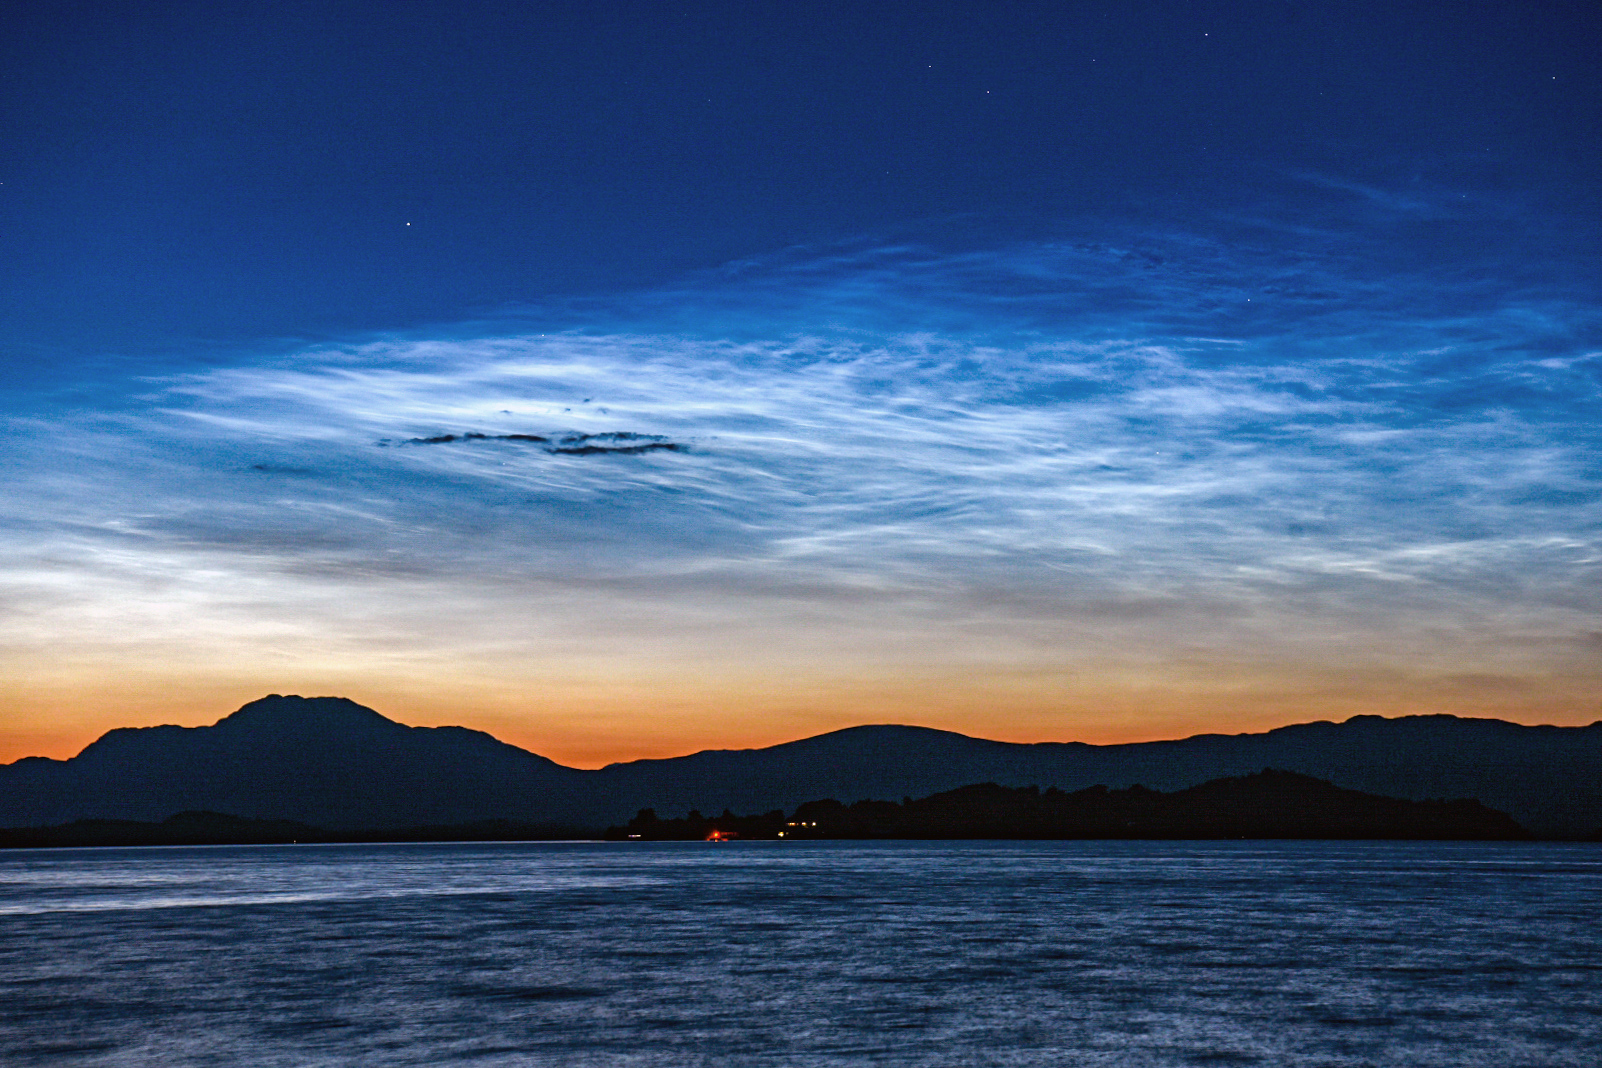 Noctilucent cloud over Loch Lomond. The clouds appear electric blue, bright against a dark sky which graduates to an orange glow above the mountainous horizon. Waves on the Loch's surface are in the foreground.